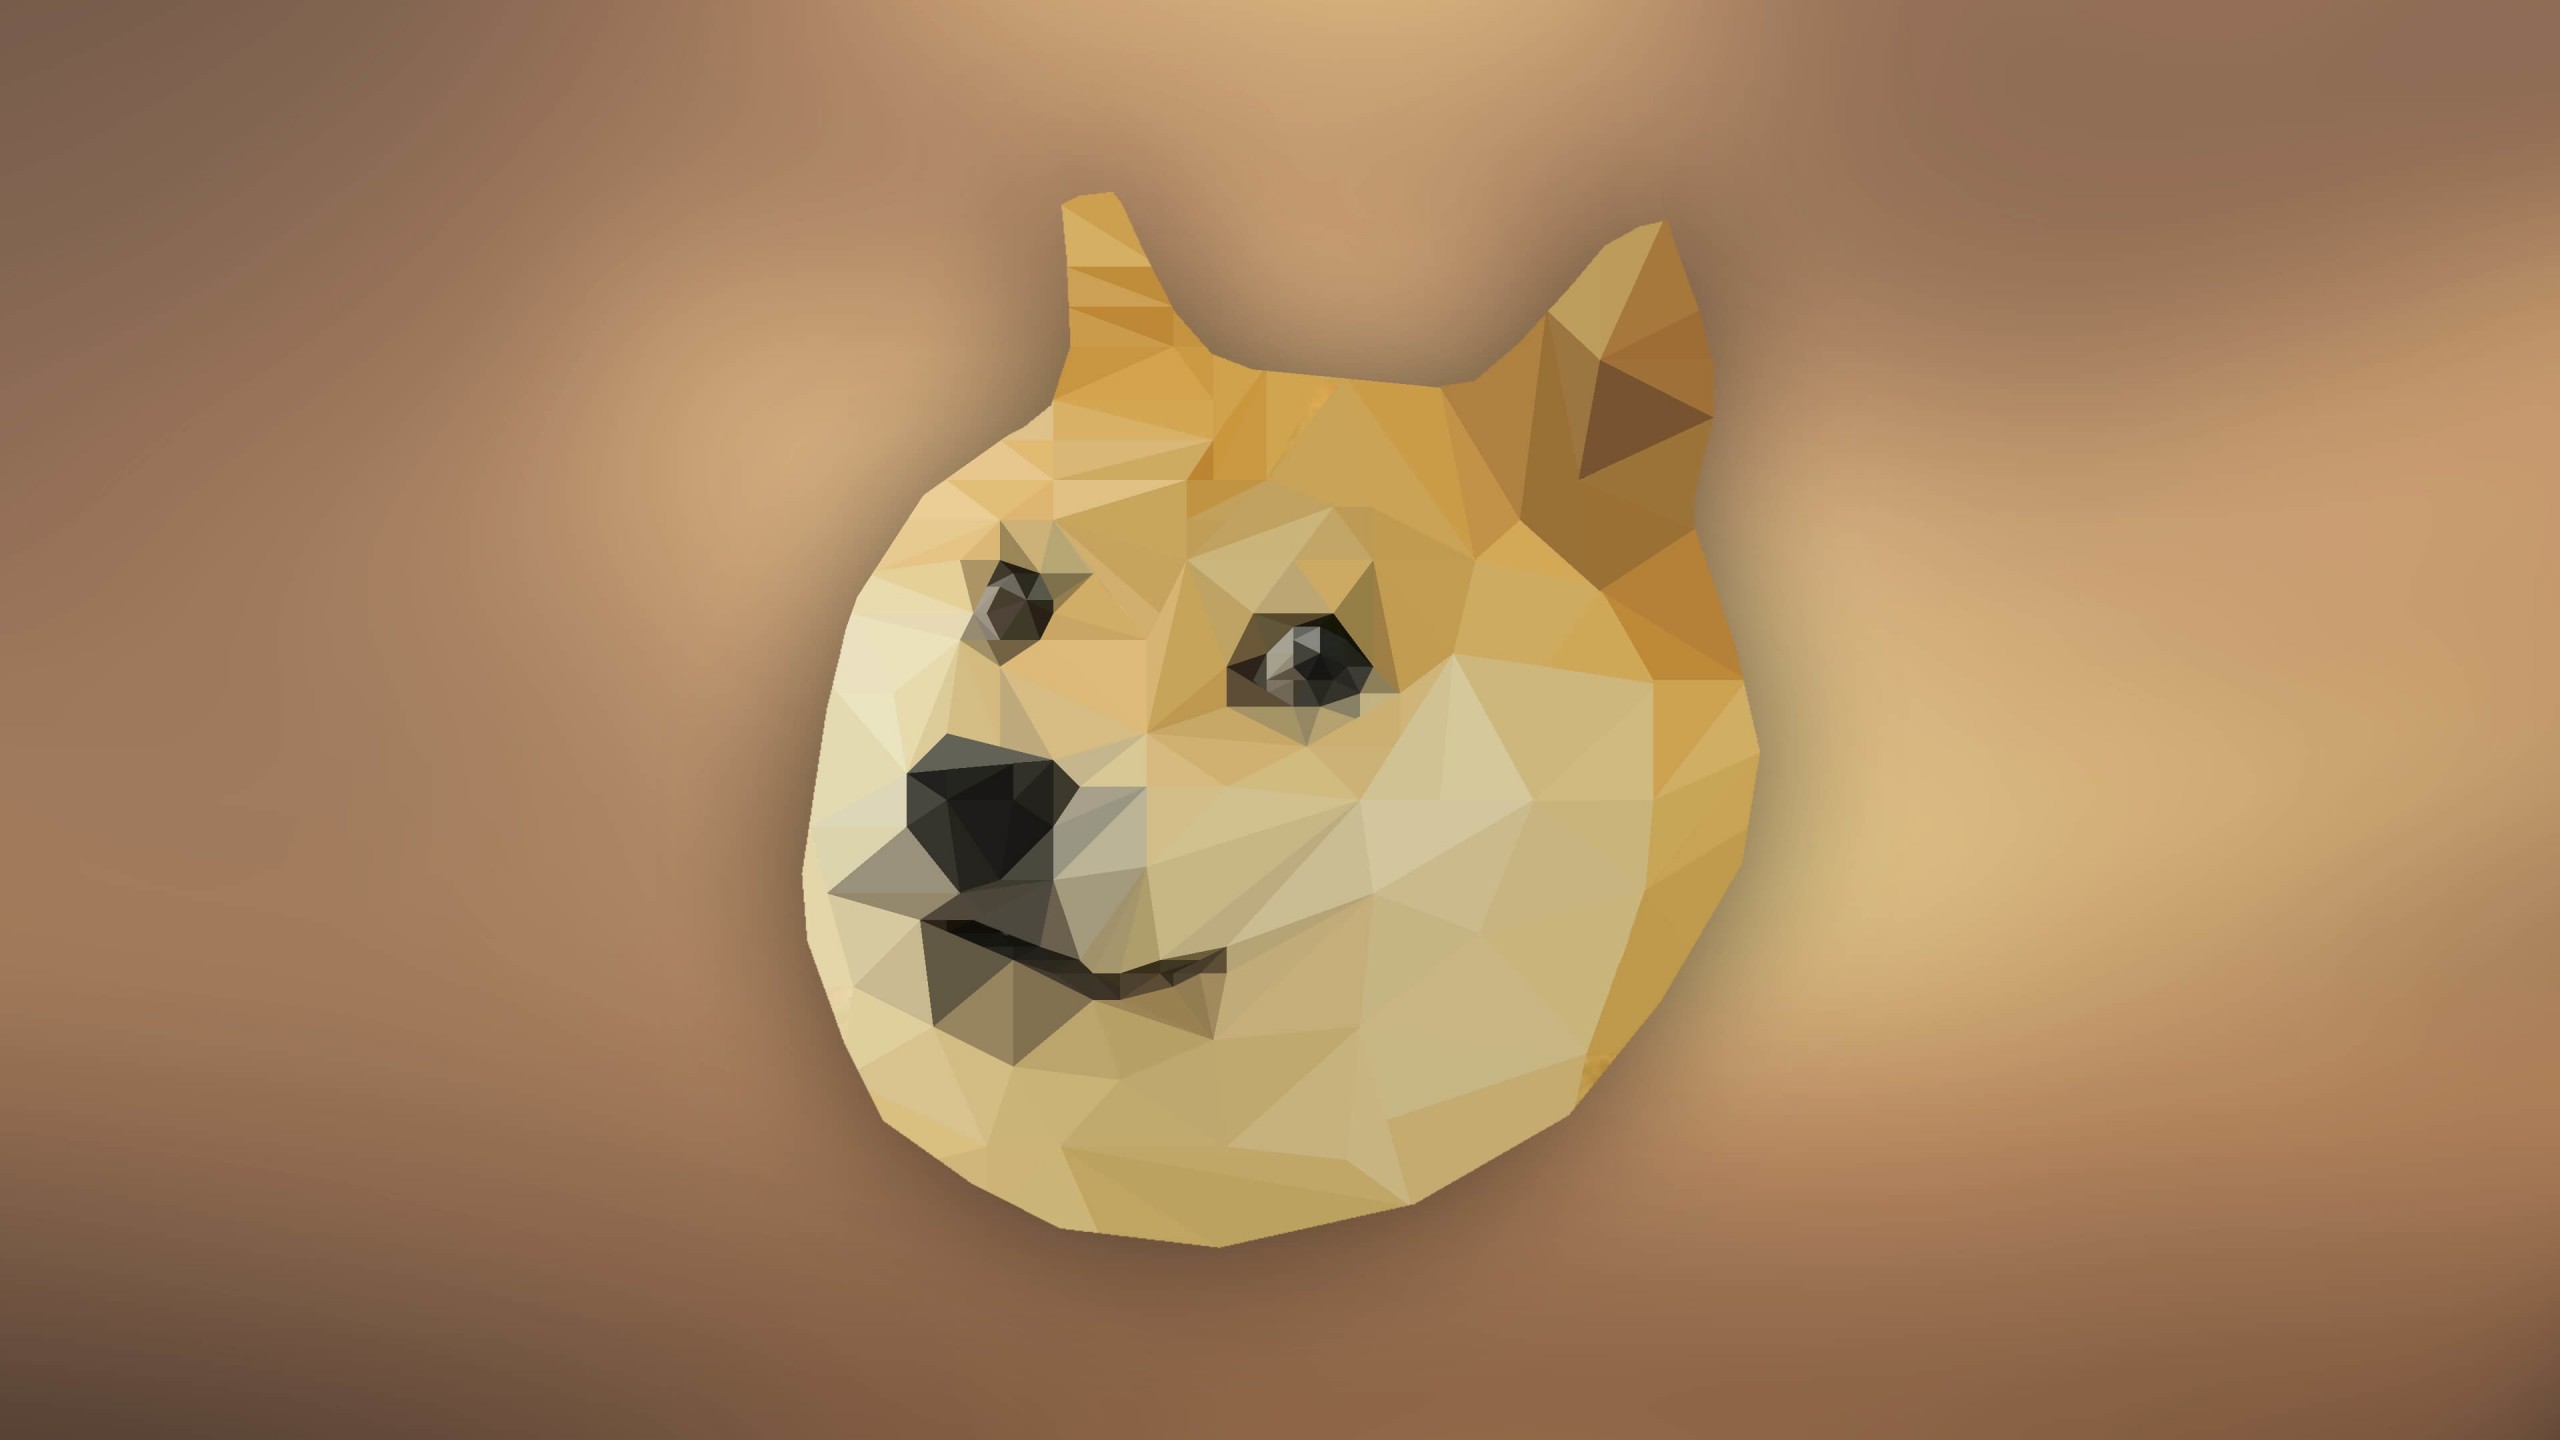 Low Poly Doge Wallpaper for Social Media YouTube Channel Art